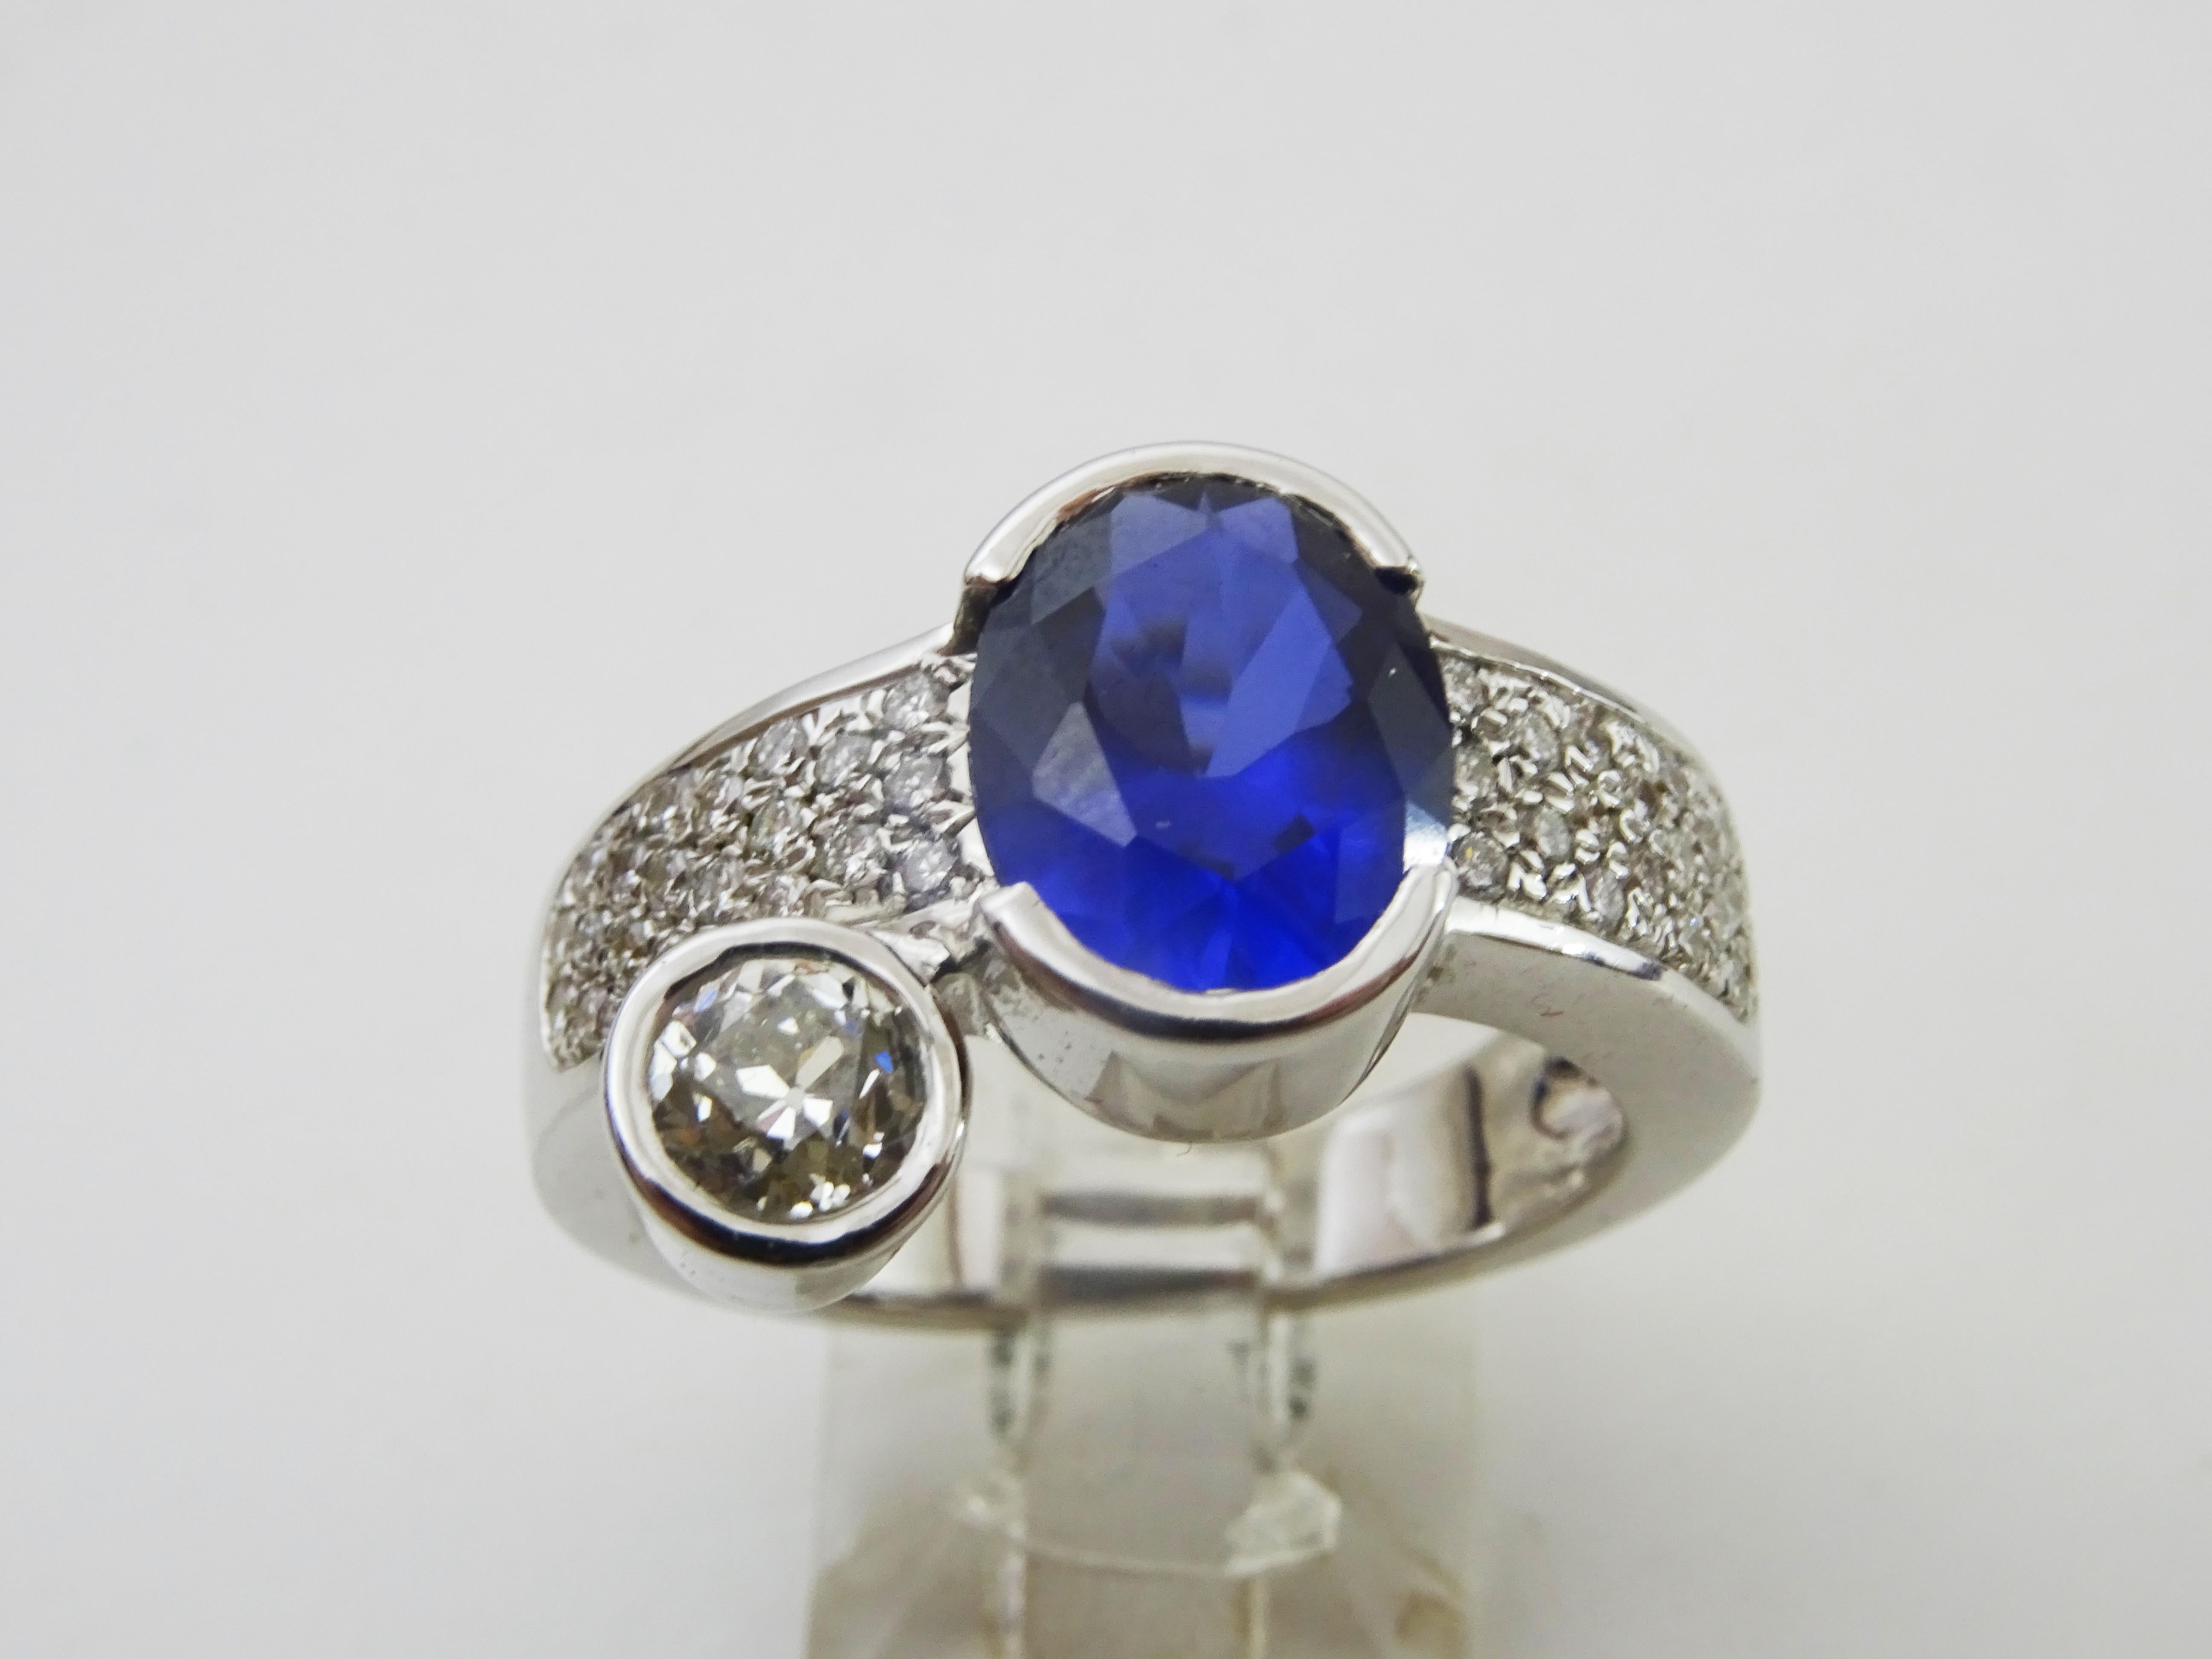 
A Ring from the 1960's.
Made in hallmarked 18 karat White Gold.
The Central Stone is a 8 x 10 mm oval Tanzanite of approximately 2.4 carats.
Off center to the side of the Tanzanite there is a 4 mm round Old European cut Diamond. weighing 30